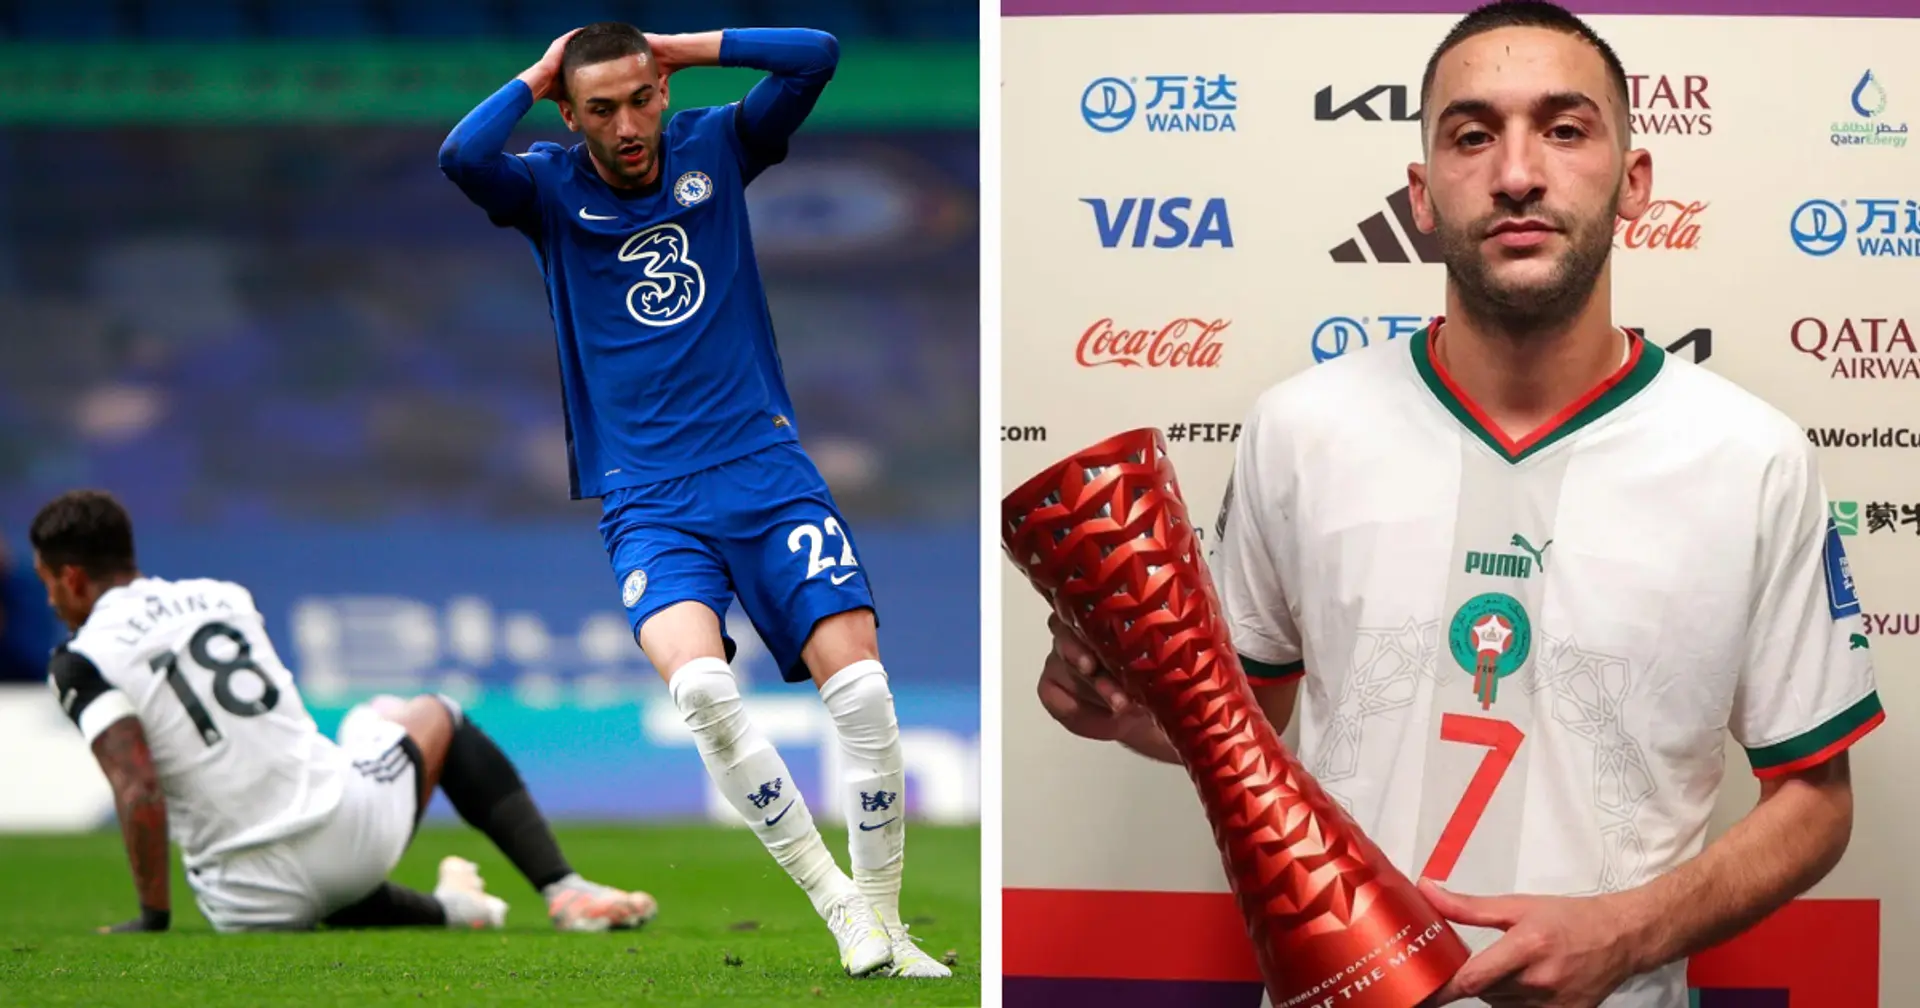 2 Chelsea players named Man of the Match at World Cup so far – both have underperformed for Blues